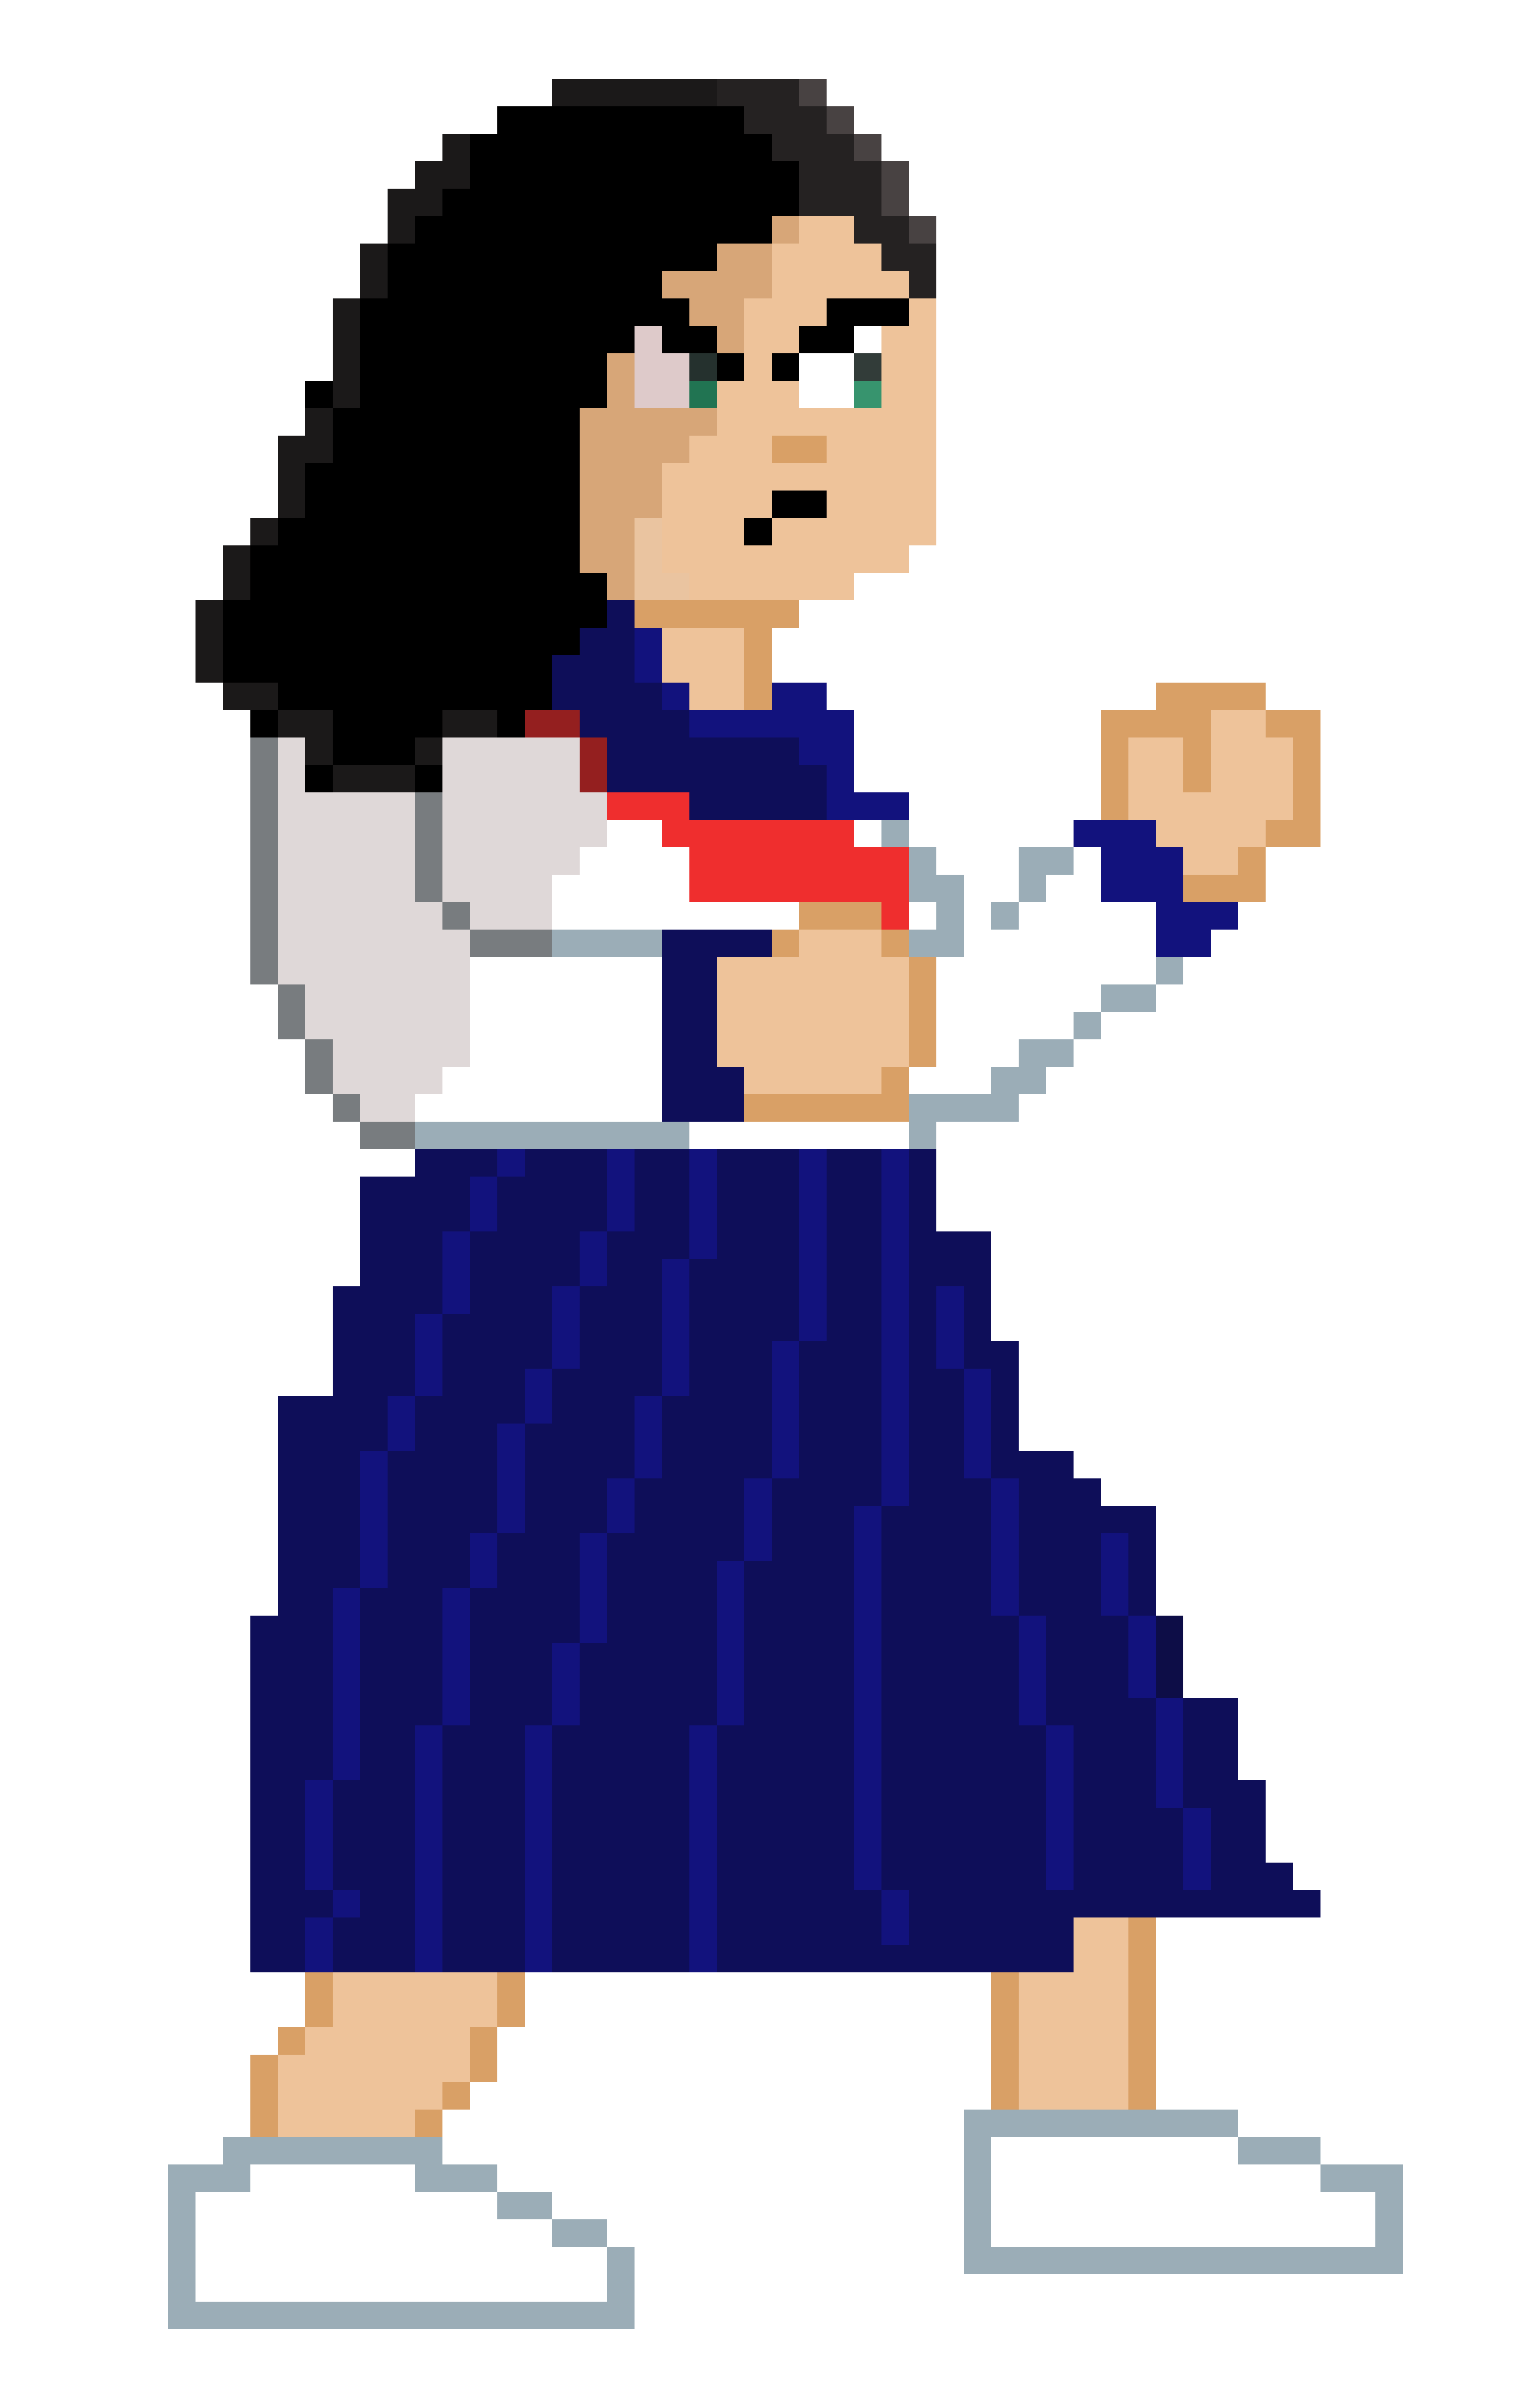 The first version of the main character. I ended up changing her design as when we conducted playtests, the players thought she was a schoolgirl rather than affiliated with a gang. So, I made her more extreme! 